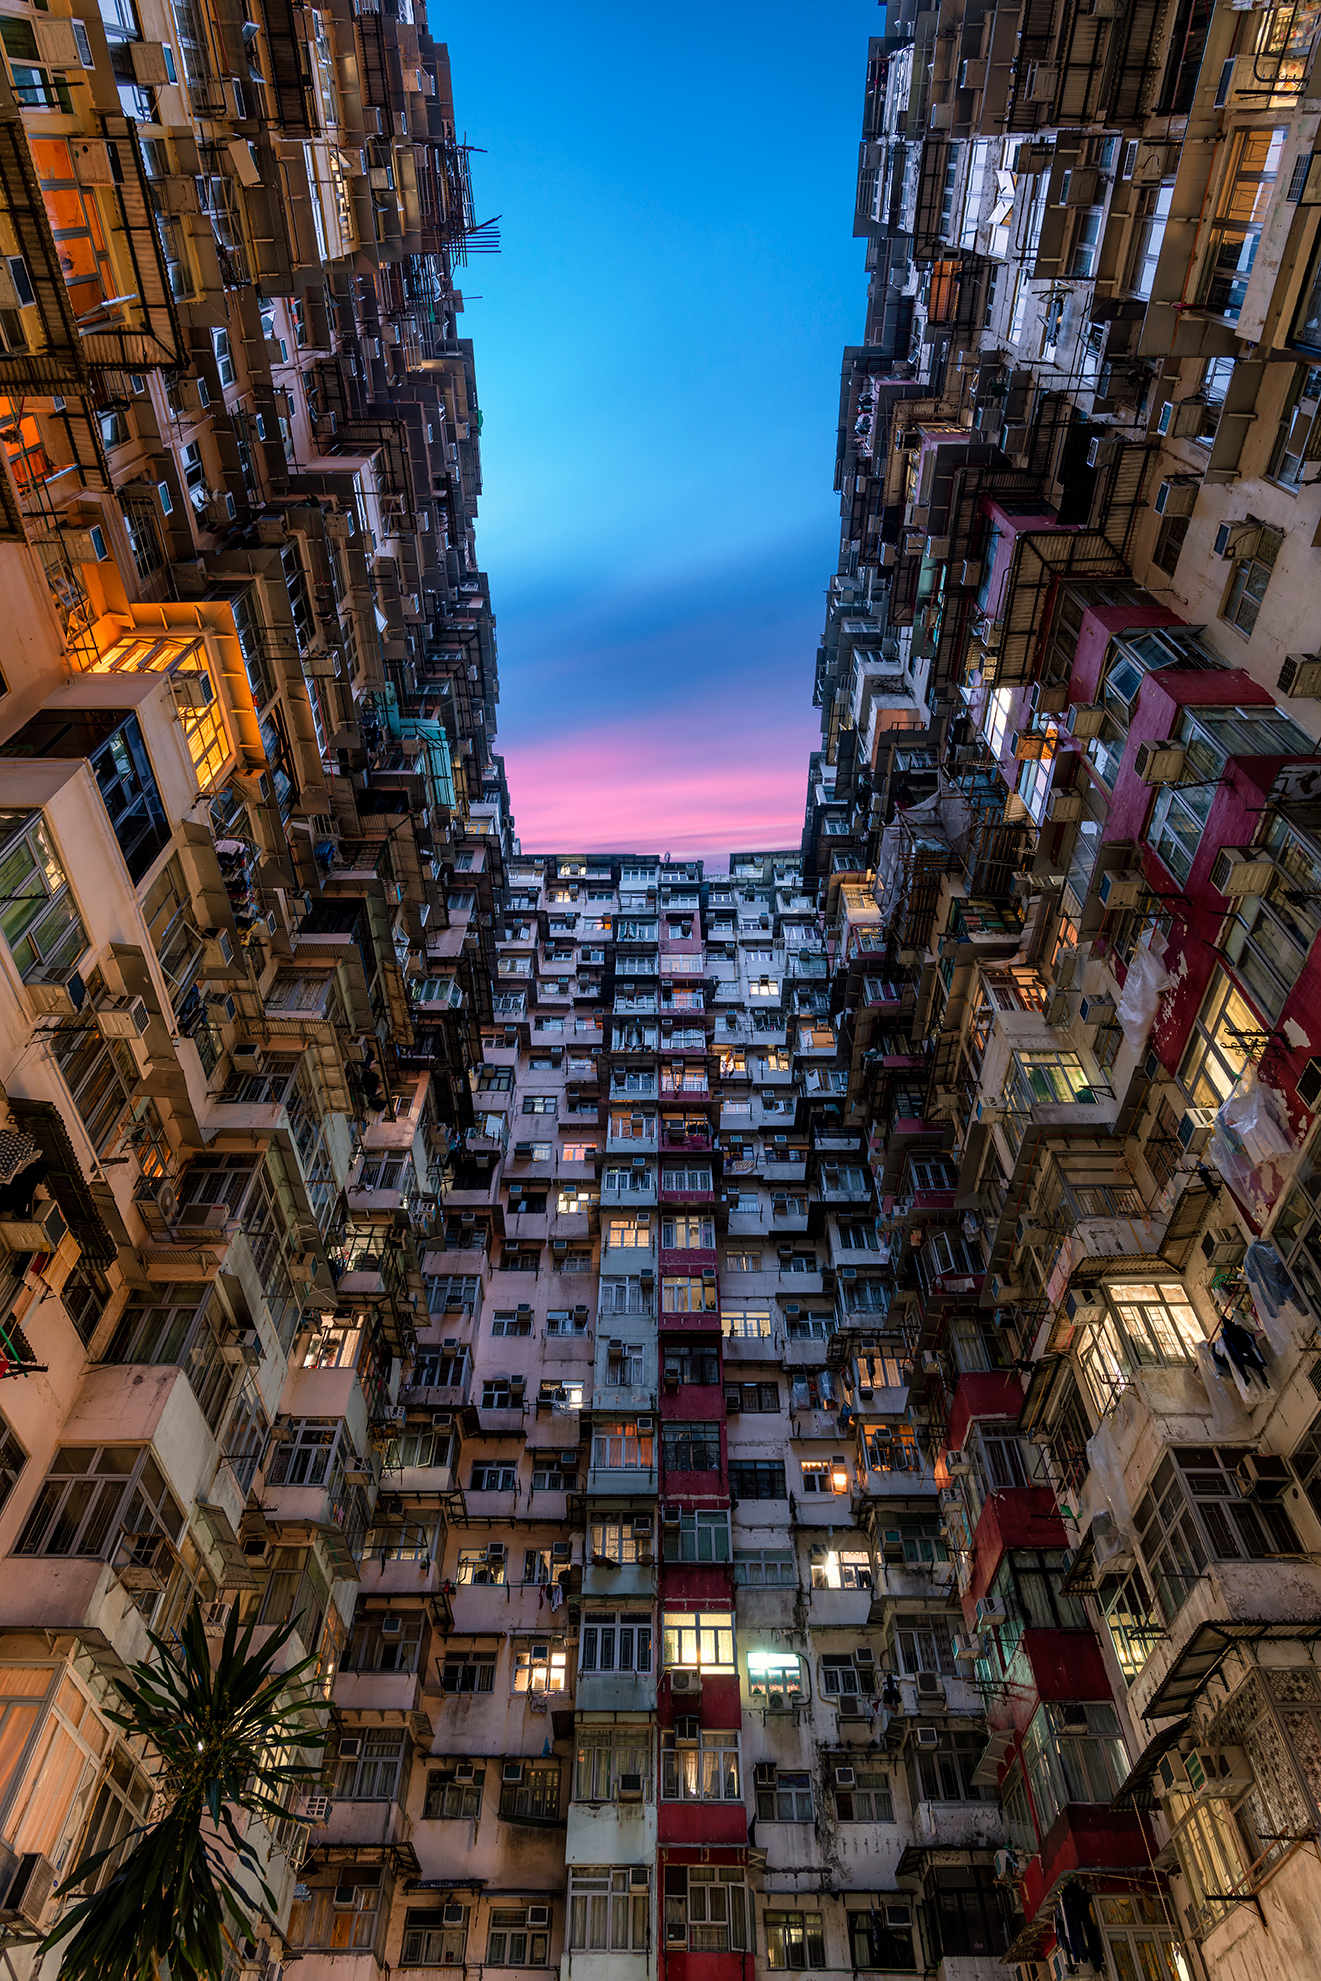 Looking up at the vertical rise of the HK Tick Fat building at sunset